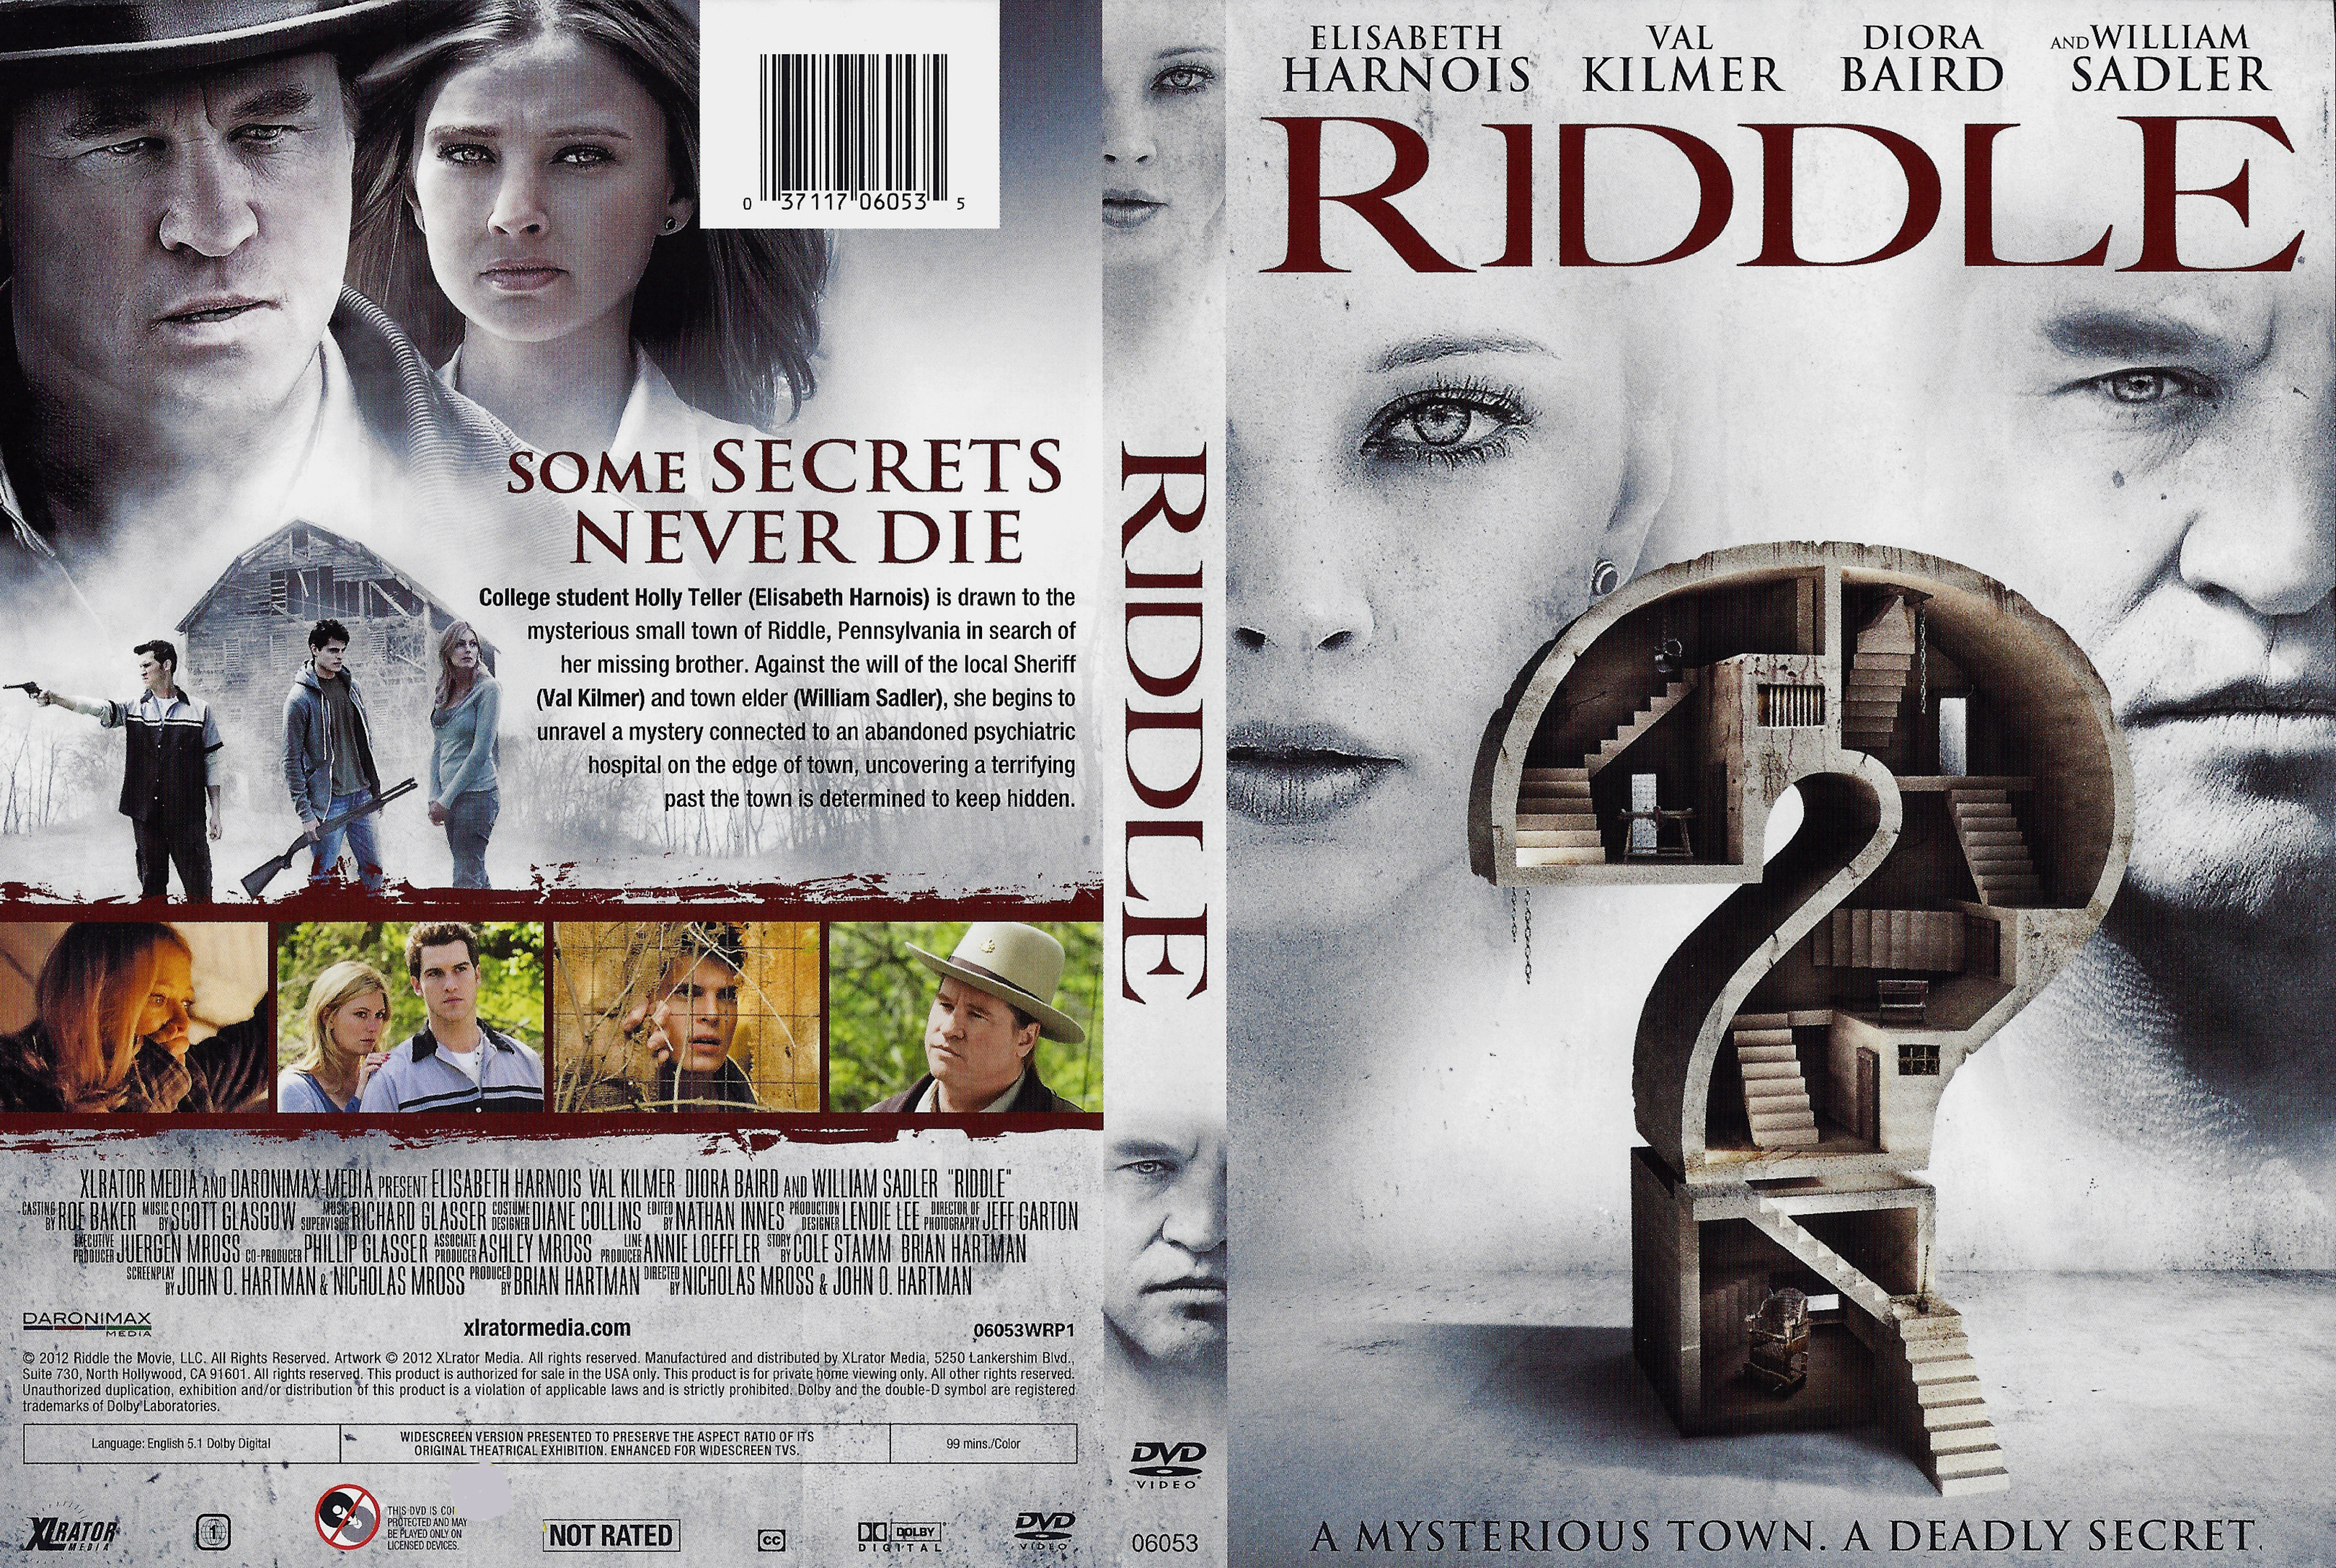 Jaquette DVD Riddle Zone 1